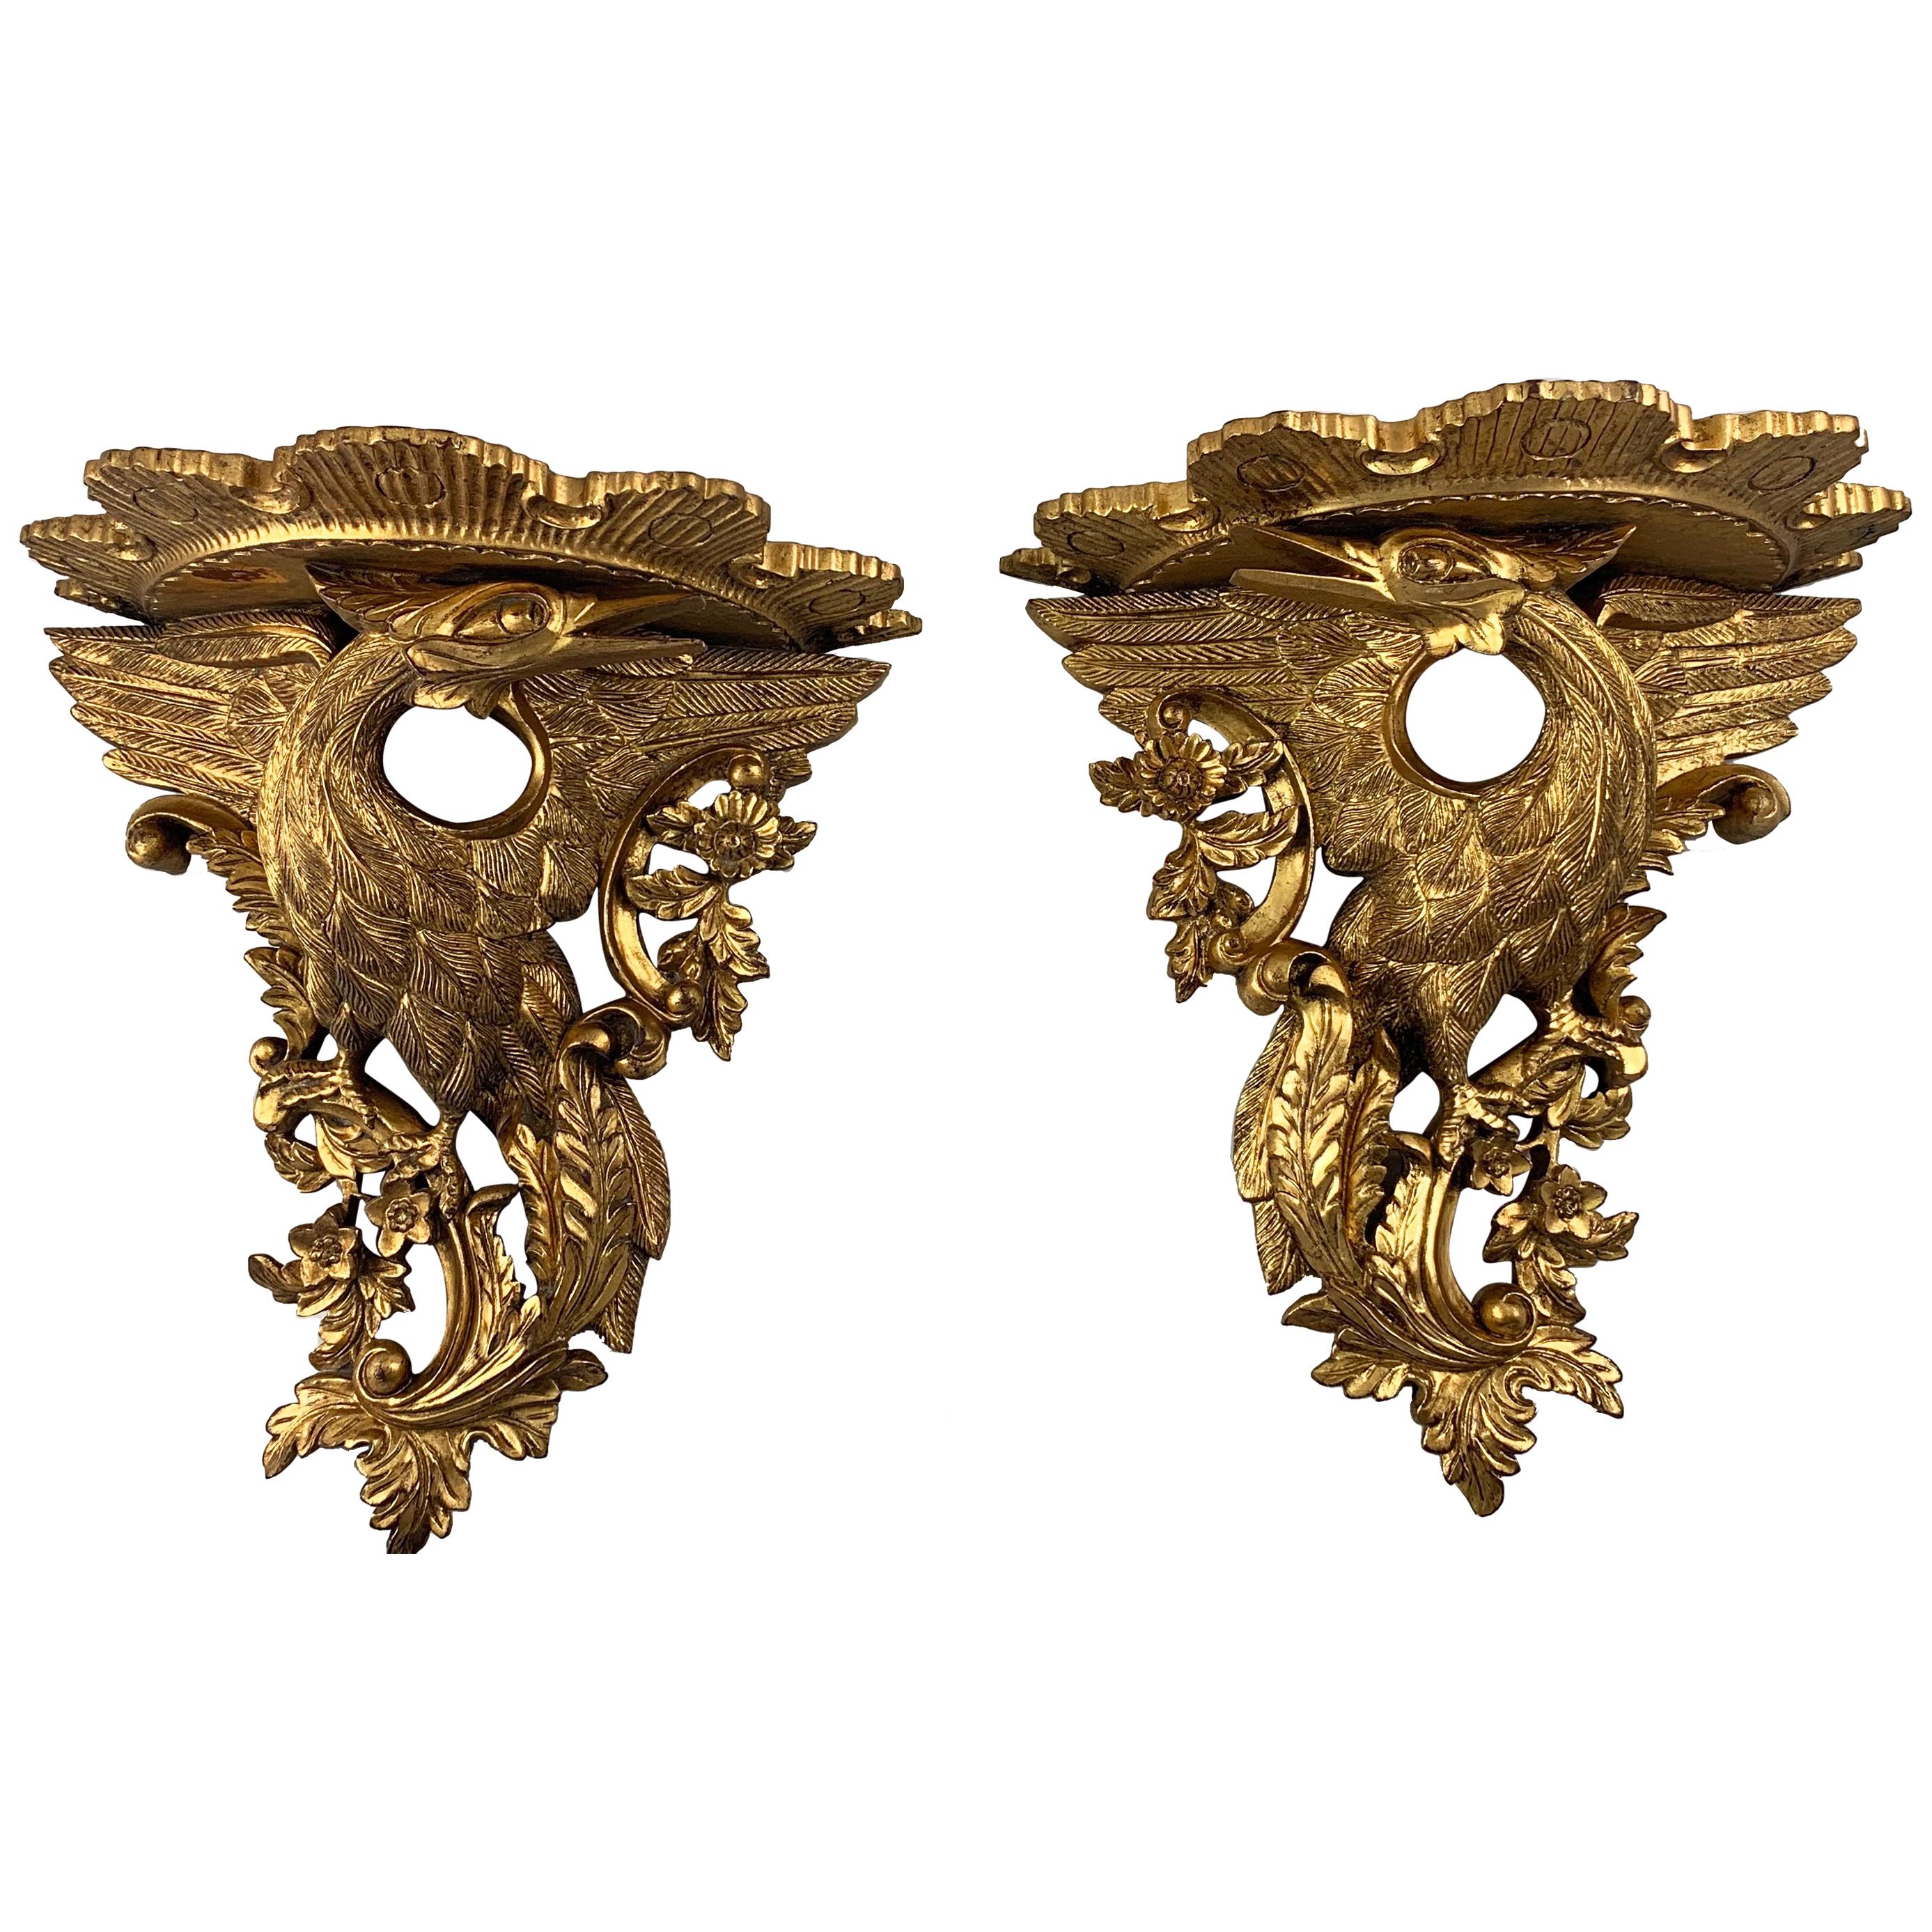 19th Century Pair of Ornate Carved Wood Gilt Wall Brackets For Sale